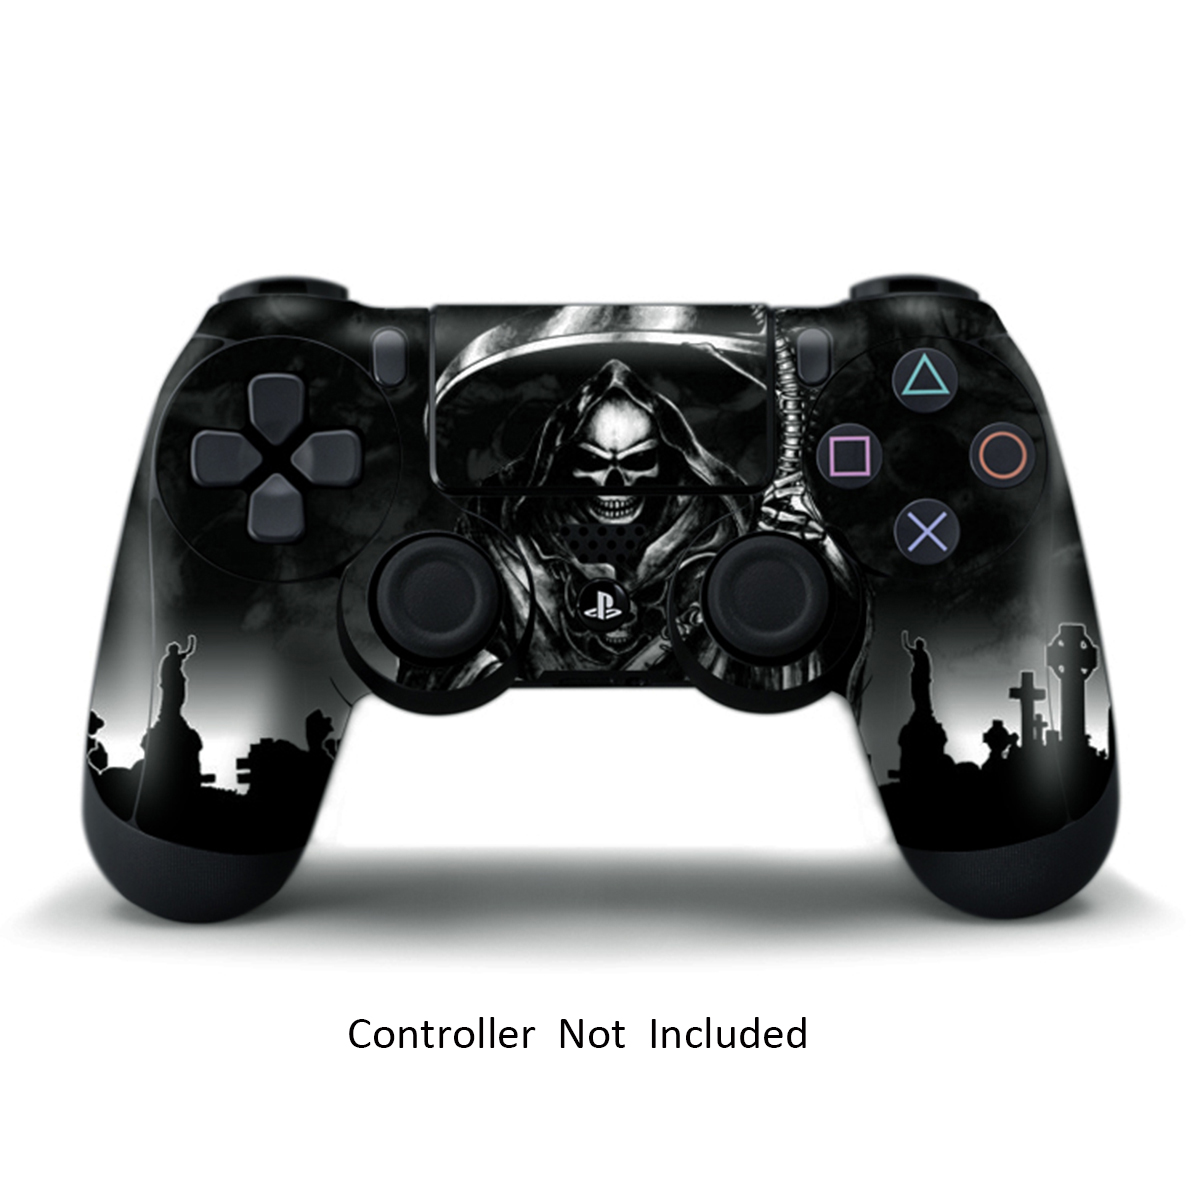 PS4 Controller Skins Stickers PS4 Remote Skin Playstation 4 Dualshock 4 Vinyl Decal Reaper Black - image 1 of 4